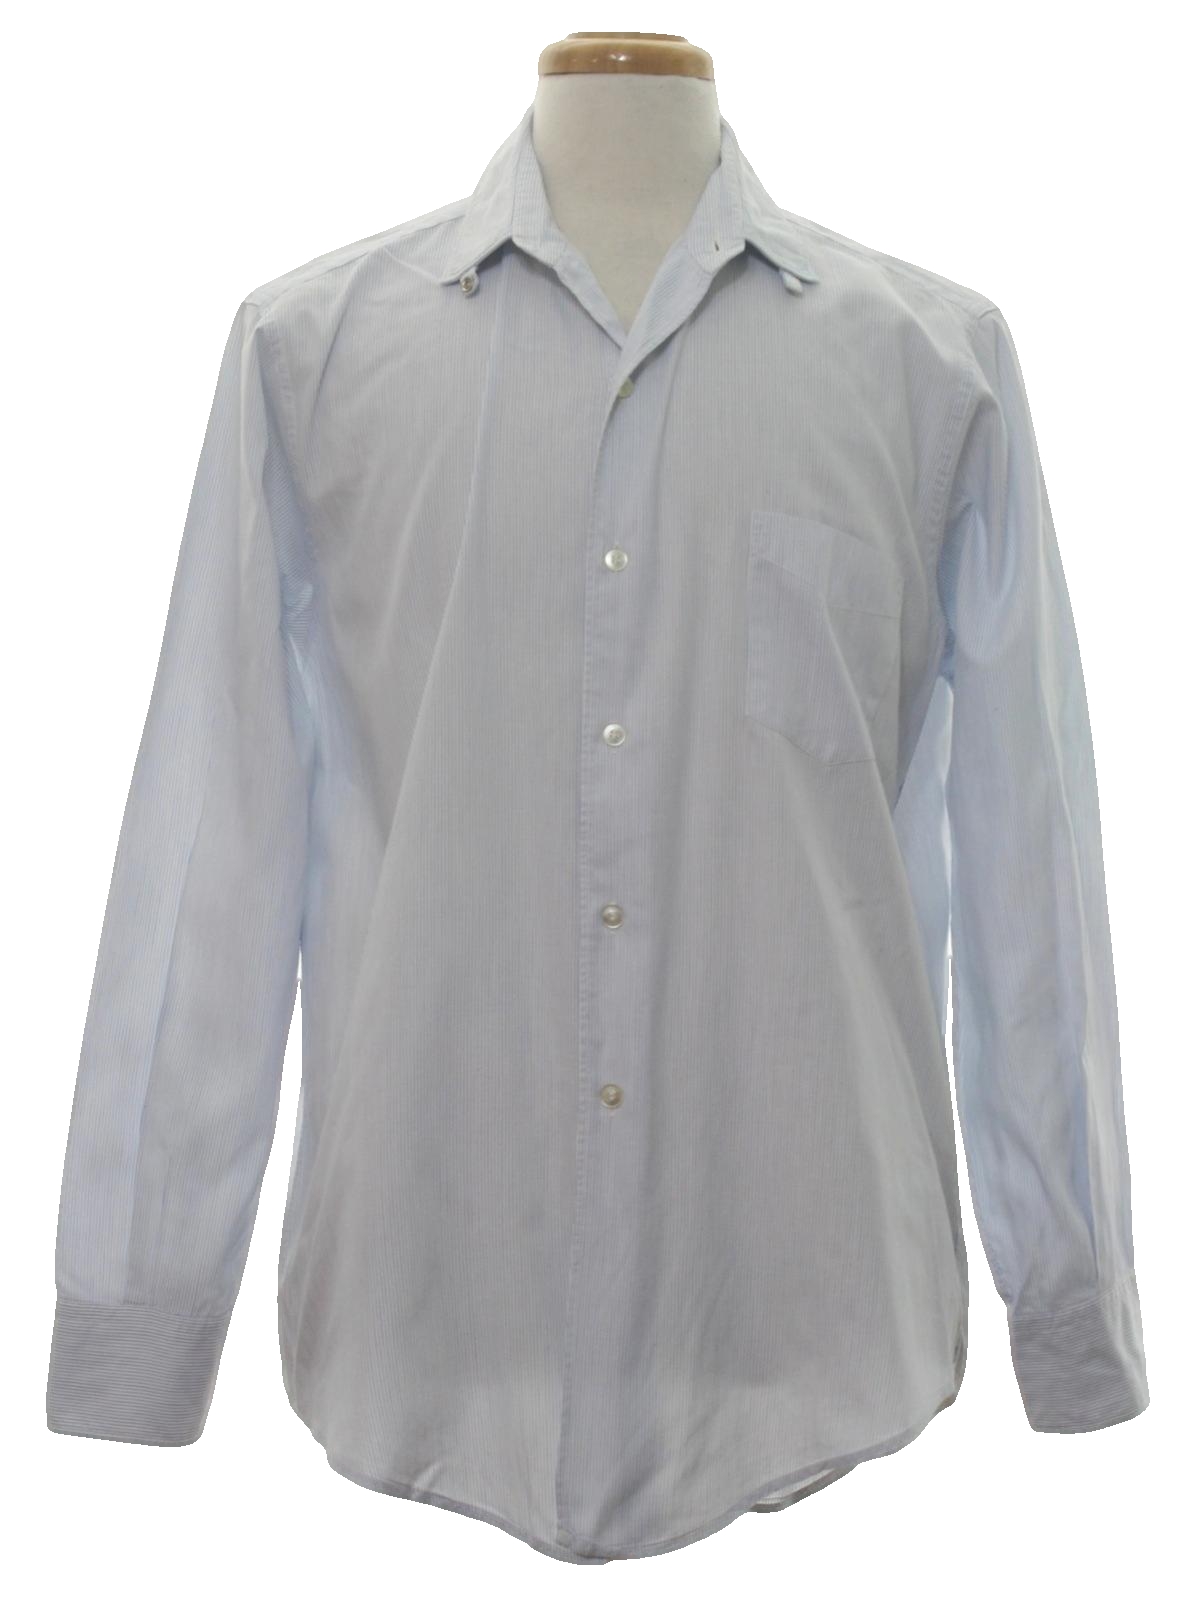 Vintage 1950's Shirt: Late 50s -The White House- Mens white background ...